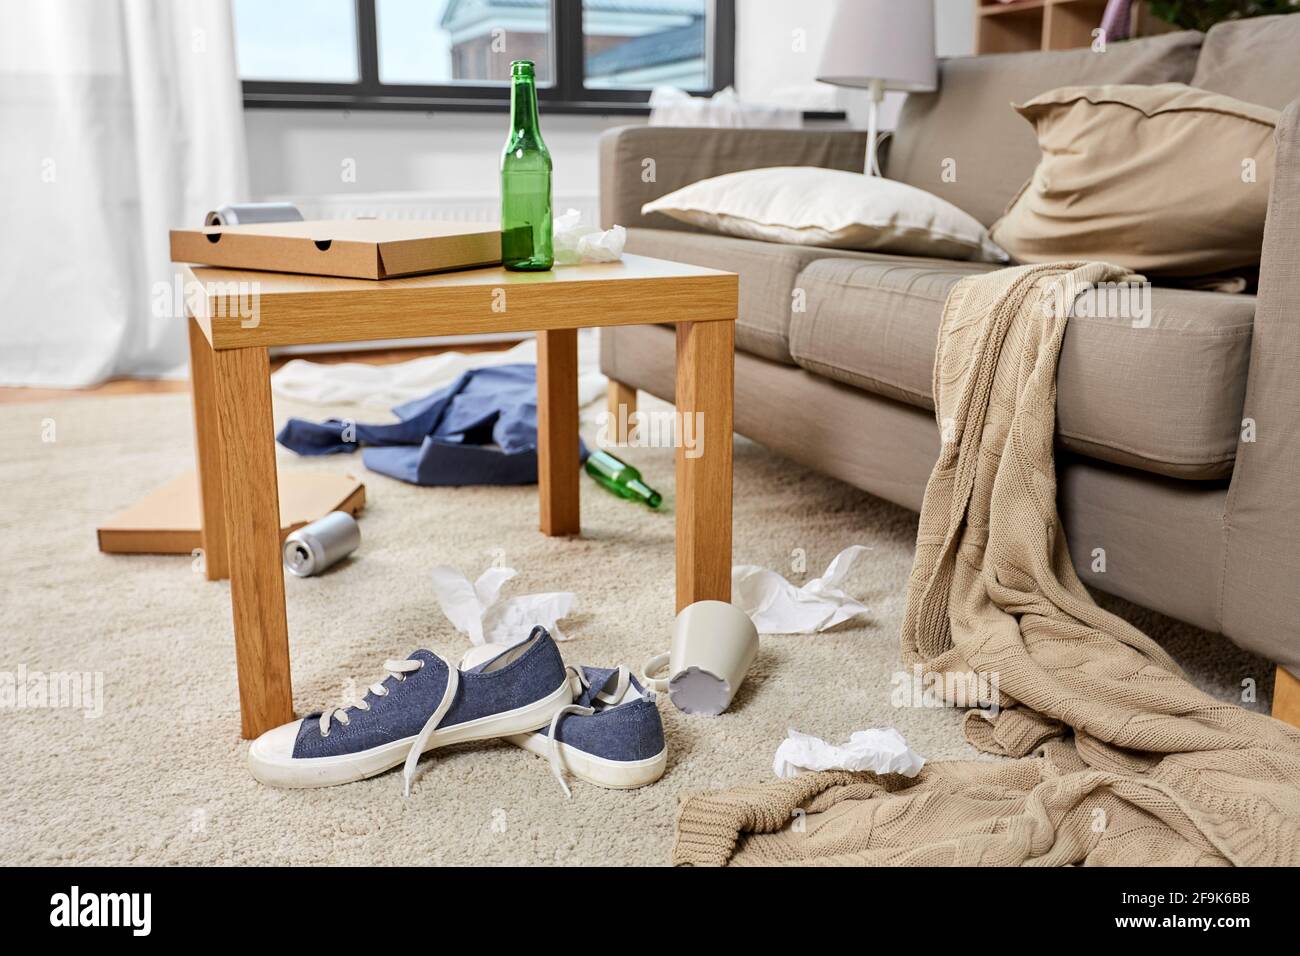 messy home living room with scattered stuff Stock Photo